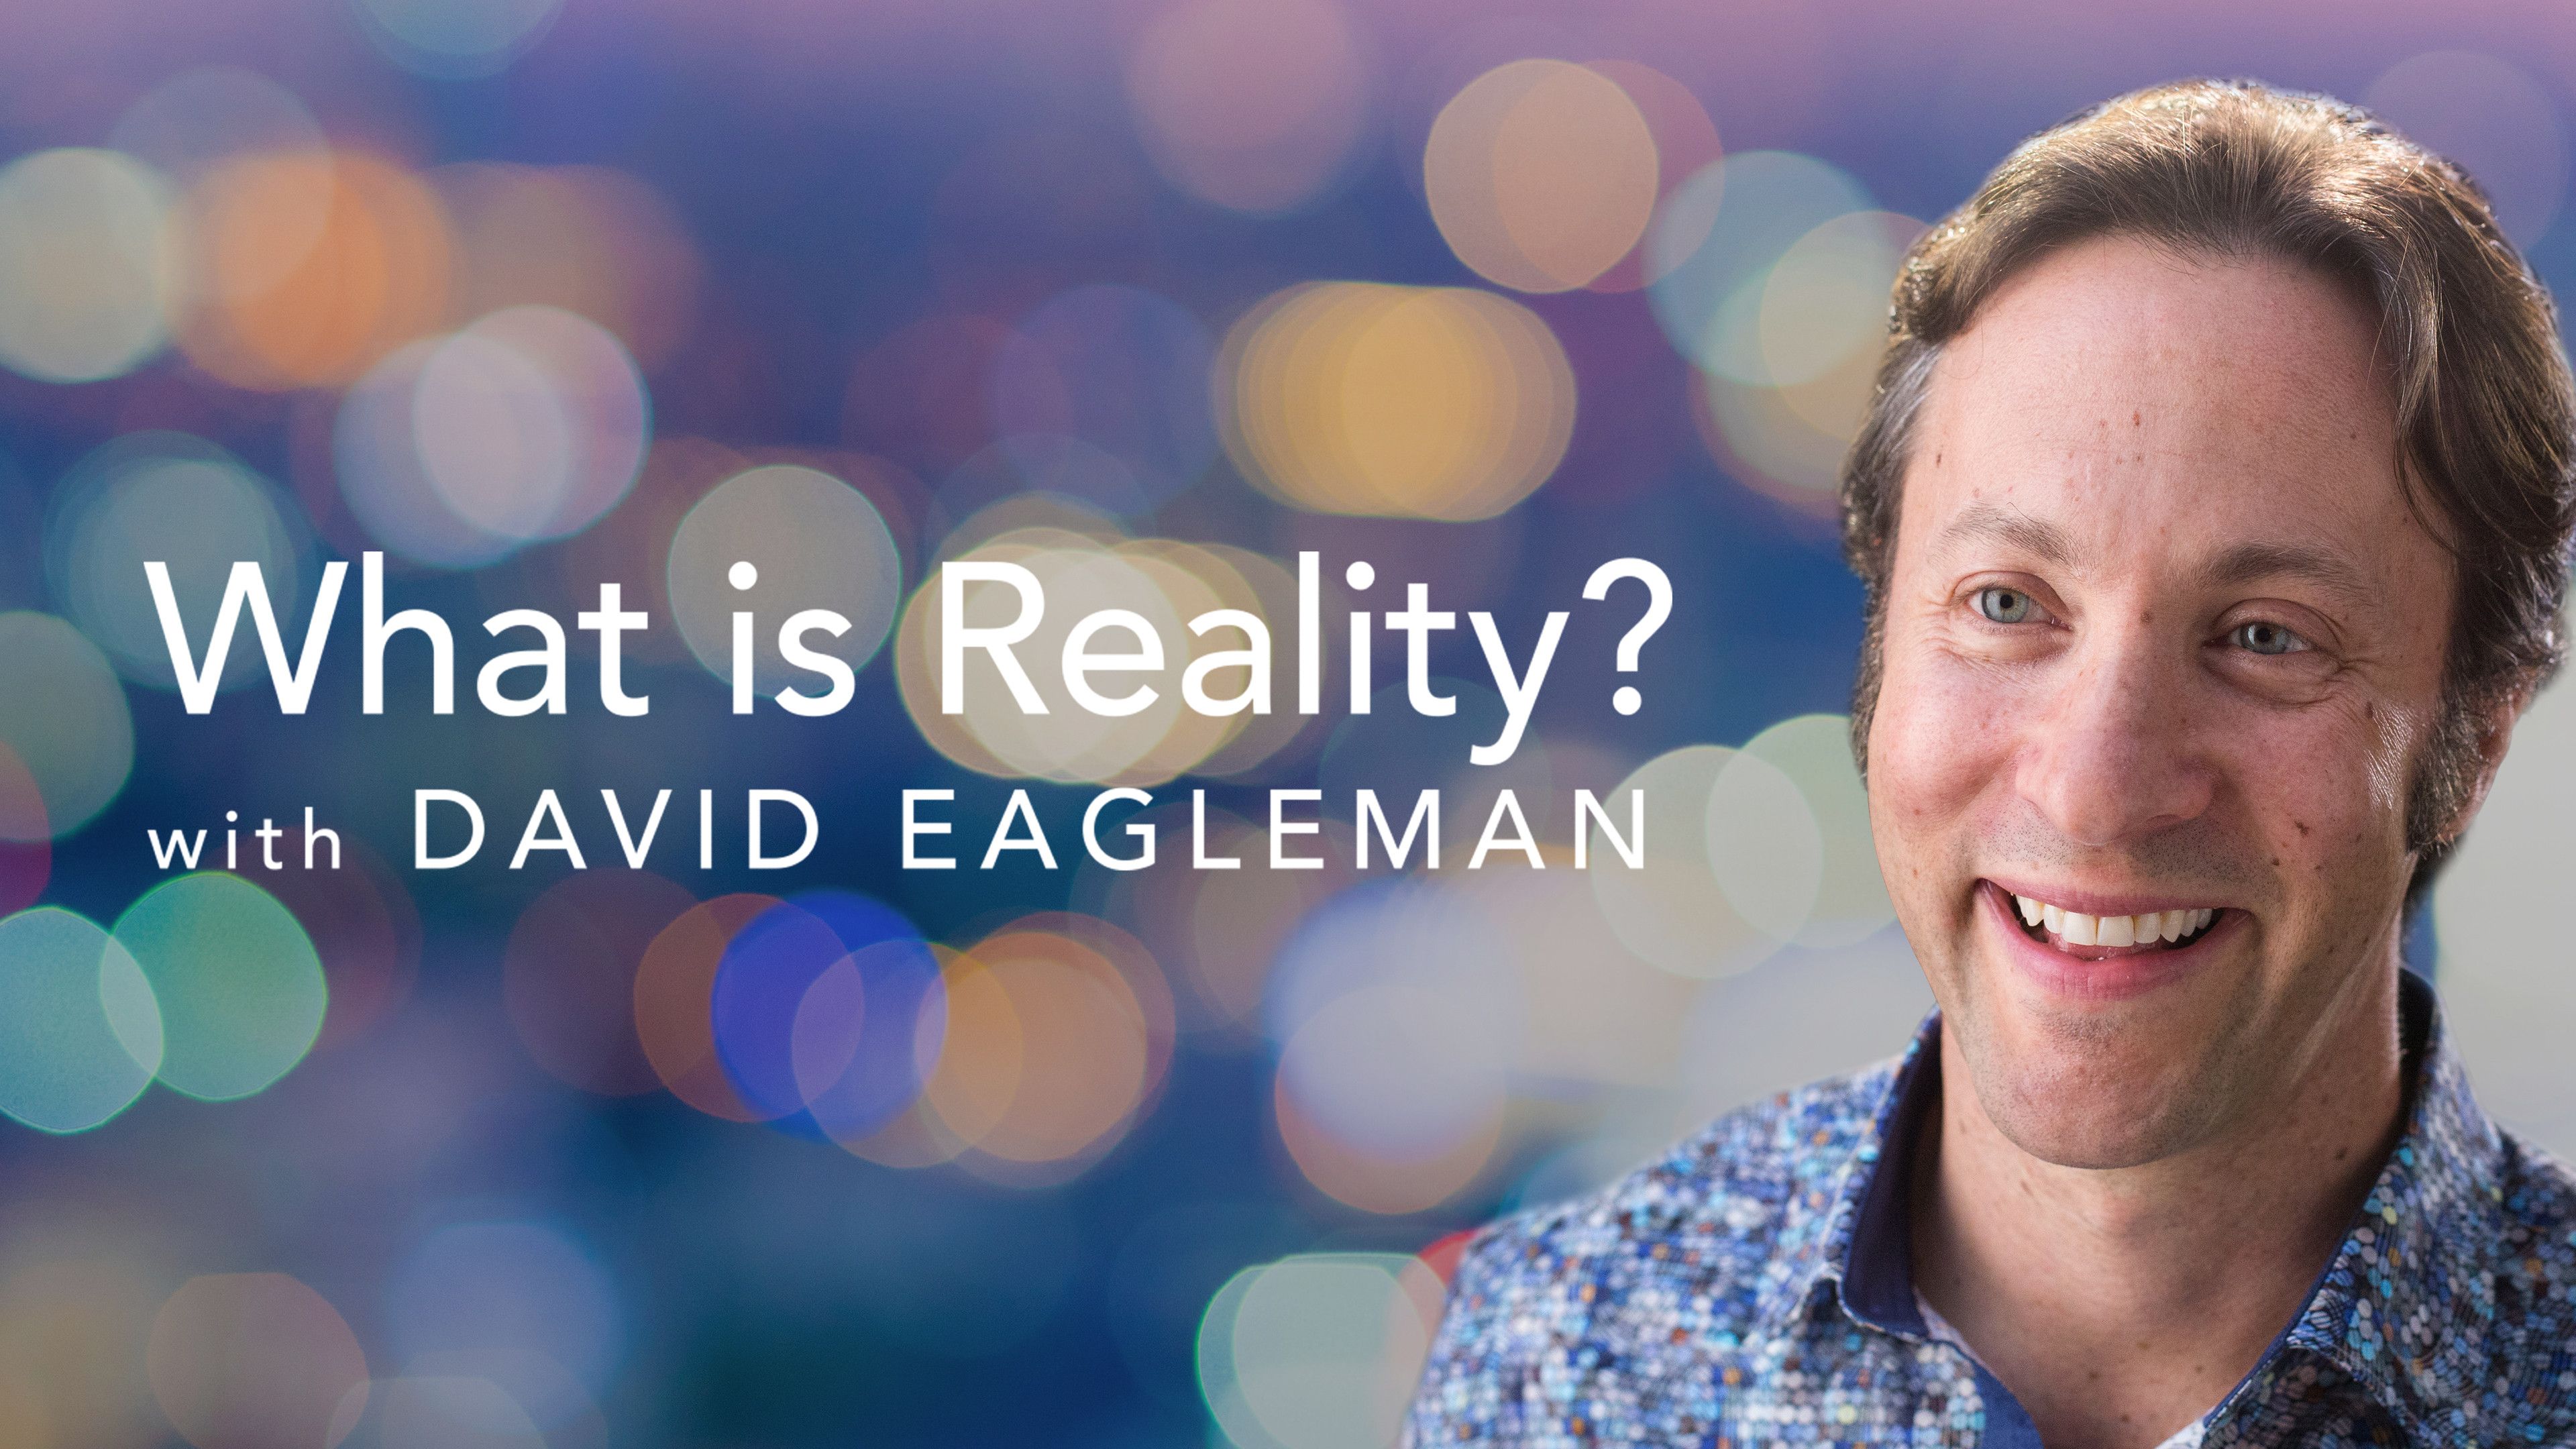 What is Reality? with David Eagleman